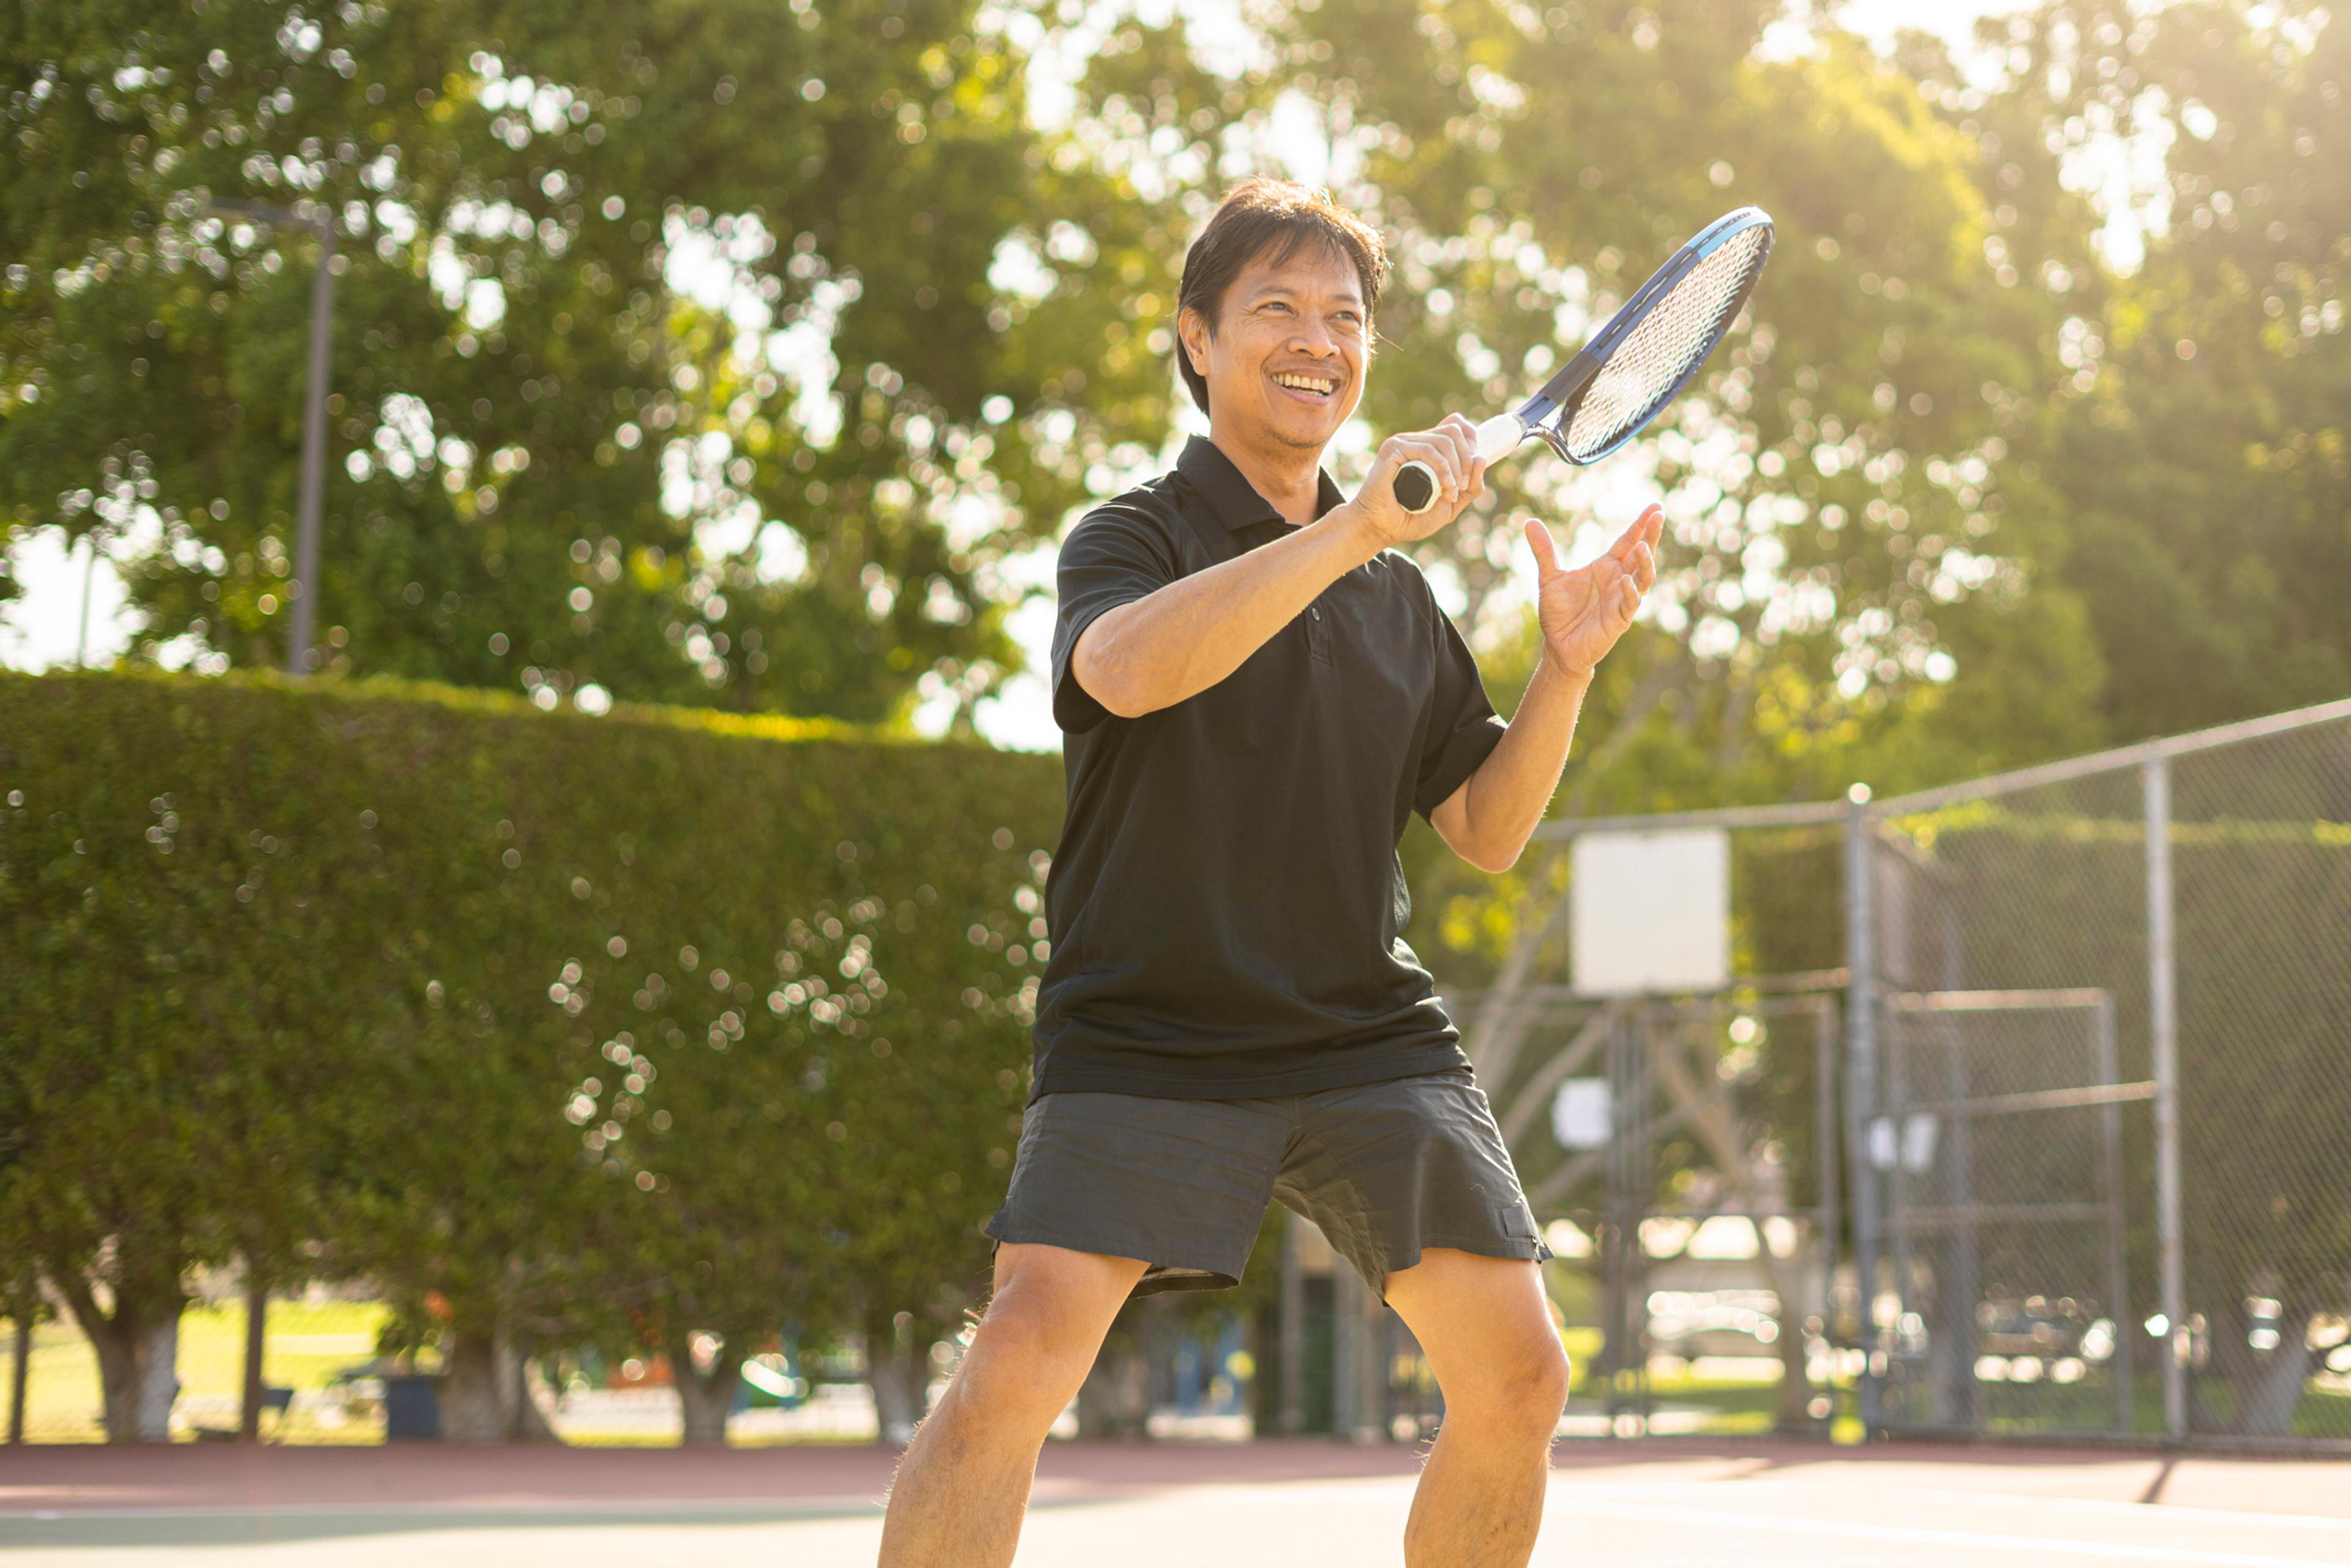 Man plays tennis staying healthy at every age